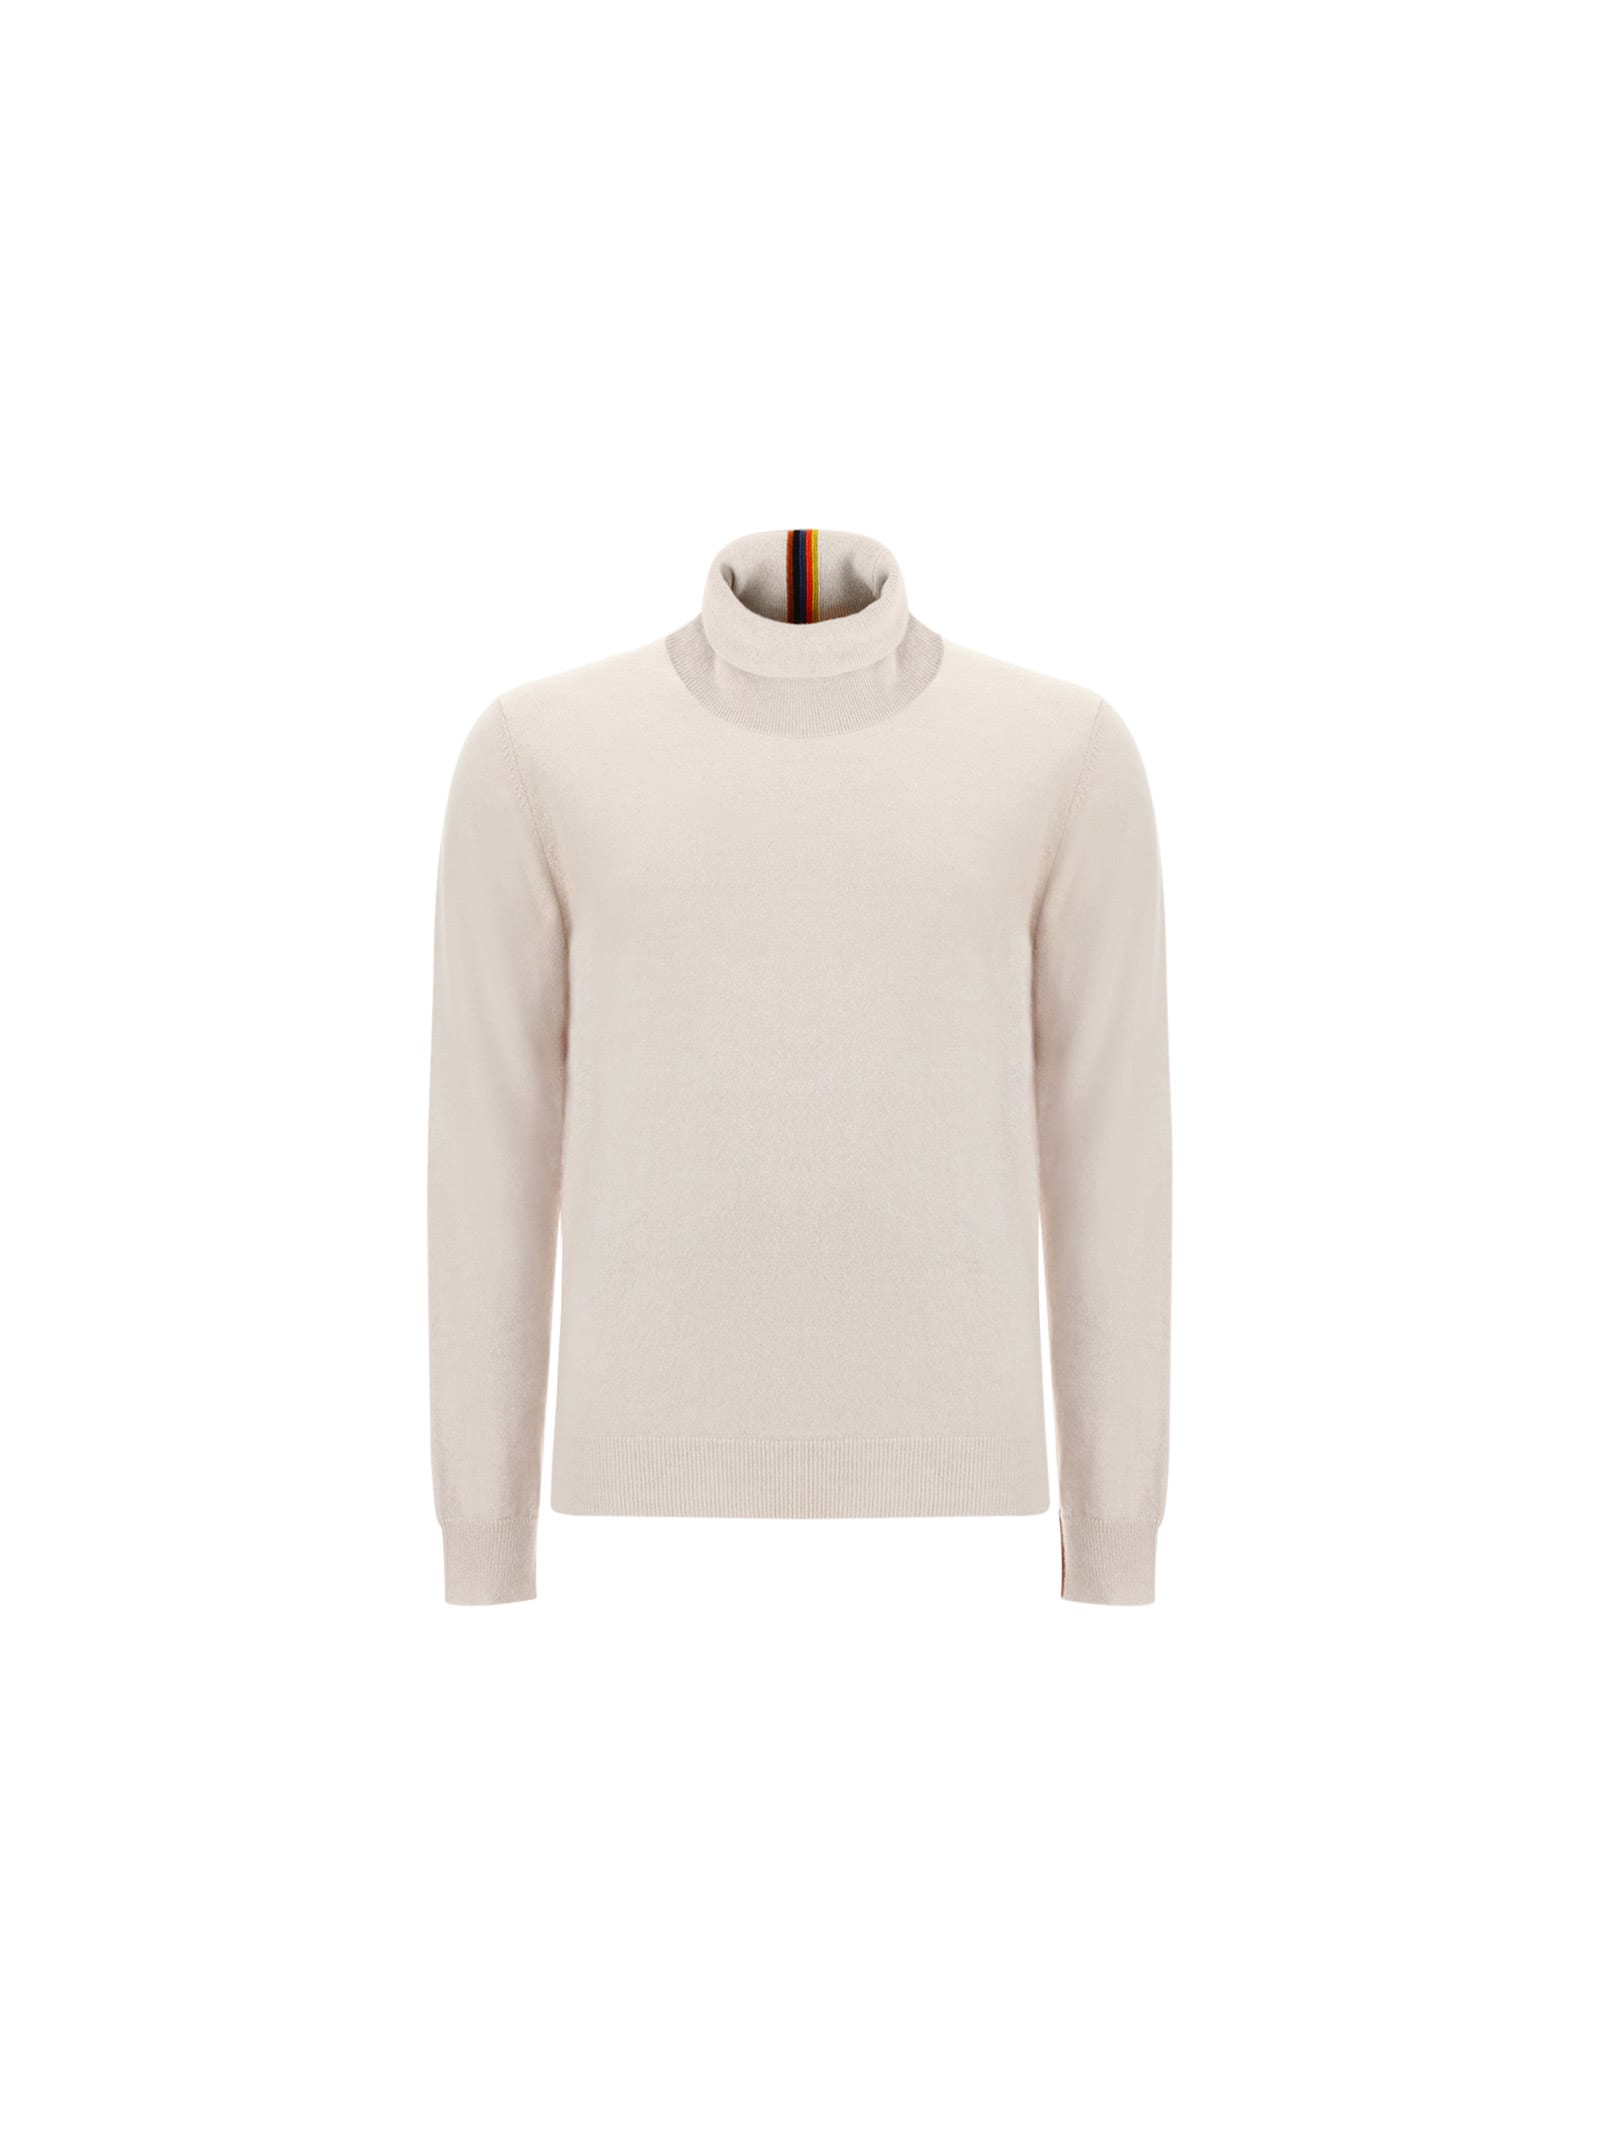 Paul Smith Gents Sweater